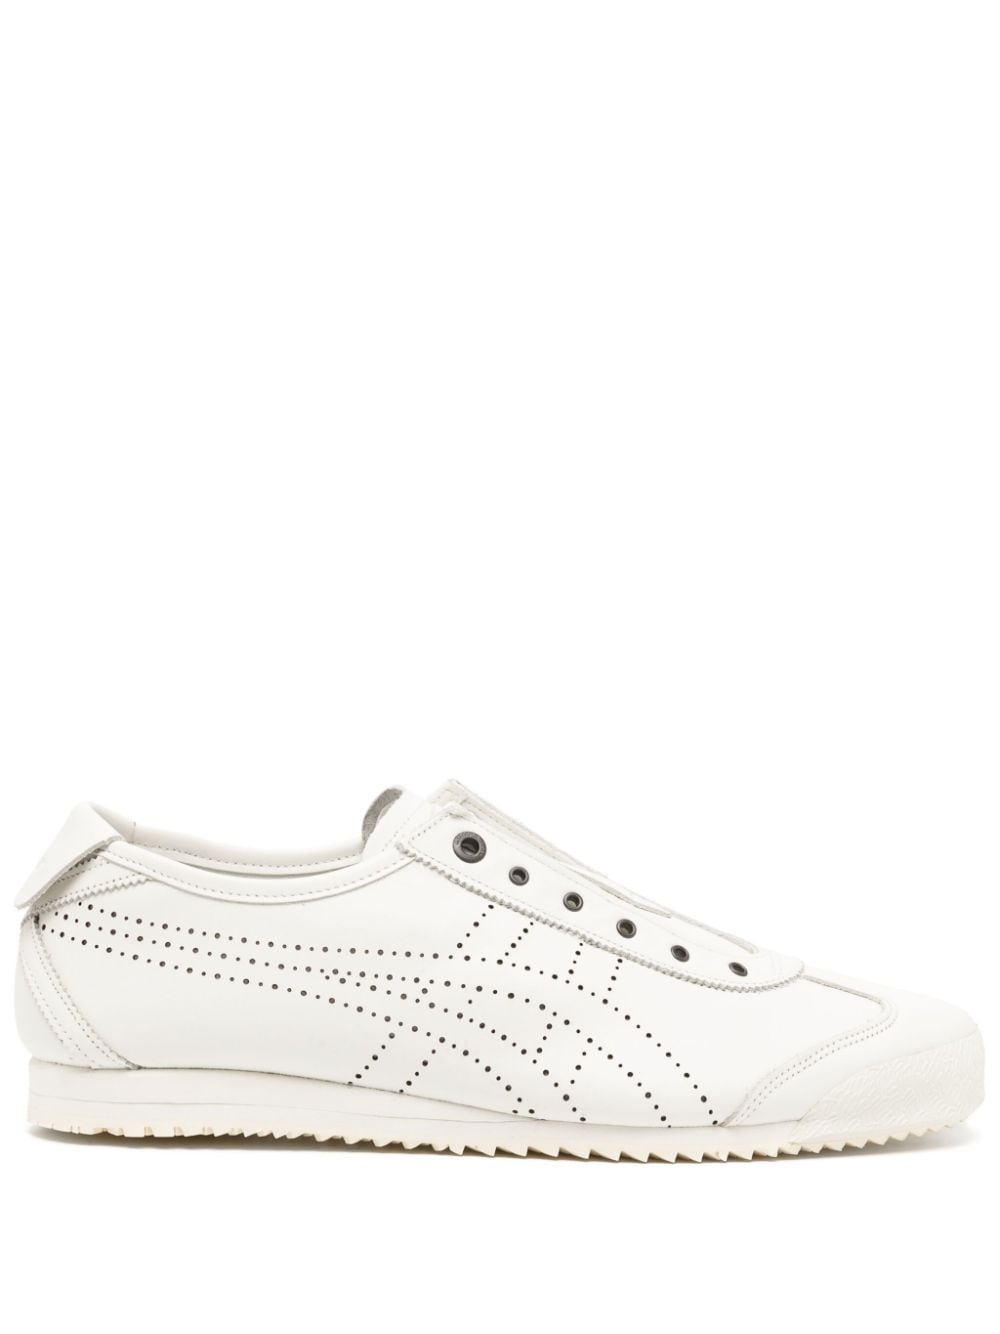 Onitsuka Tiger Mexico 66 Slip-on Trainers In White